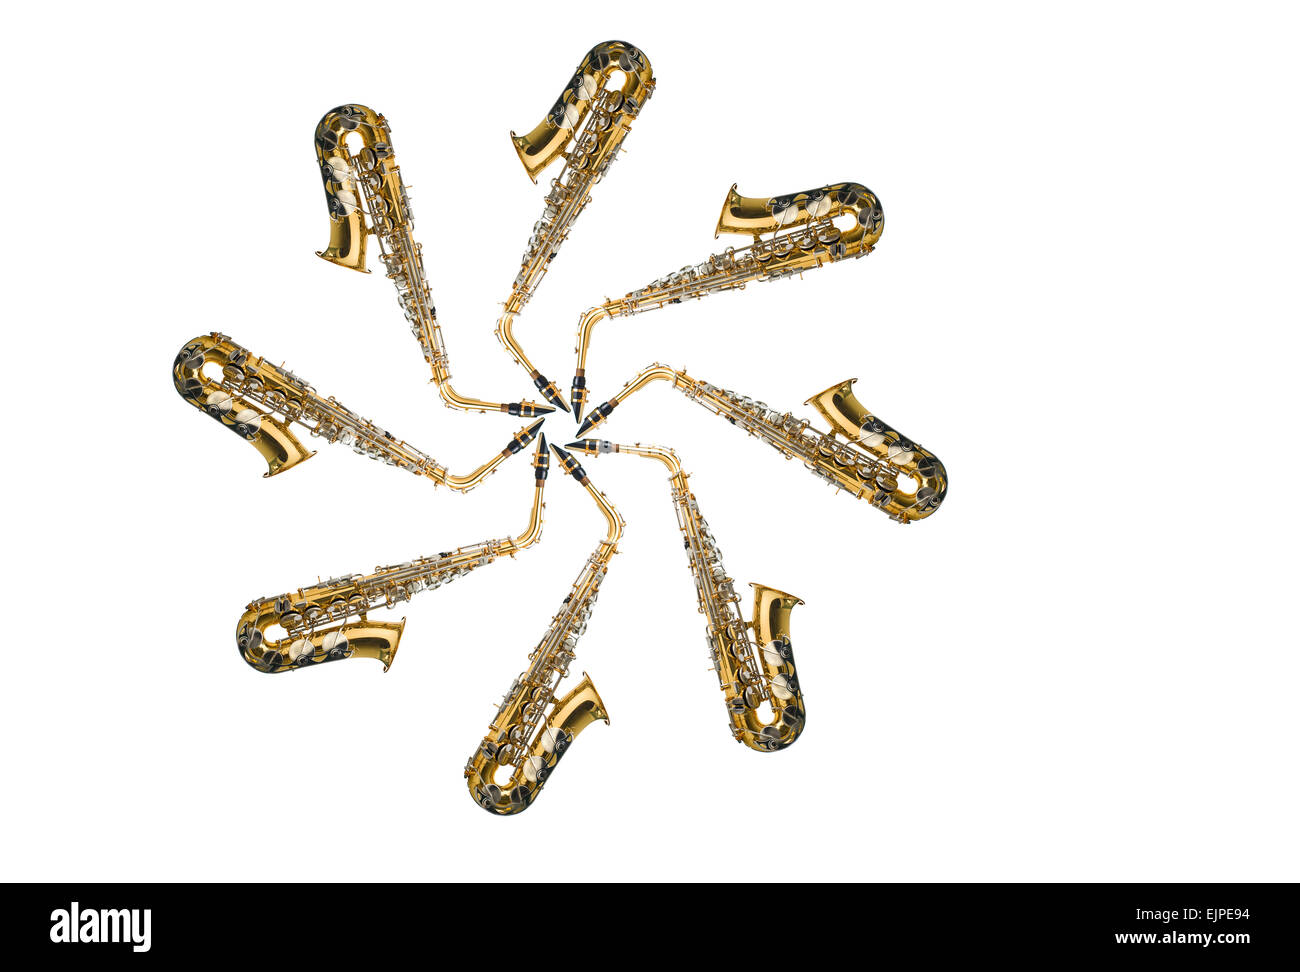 A shiny brass saxophone collage in the form of a pinwheel Stock Photo